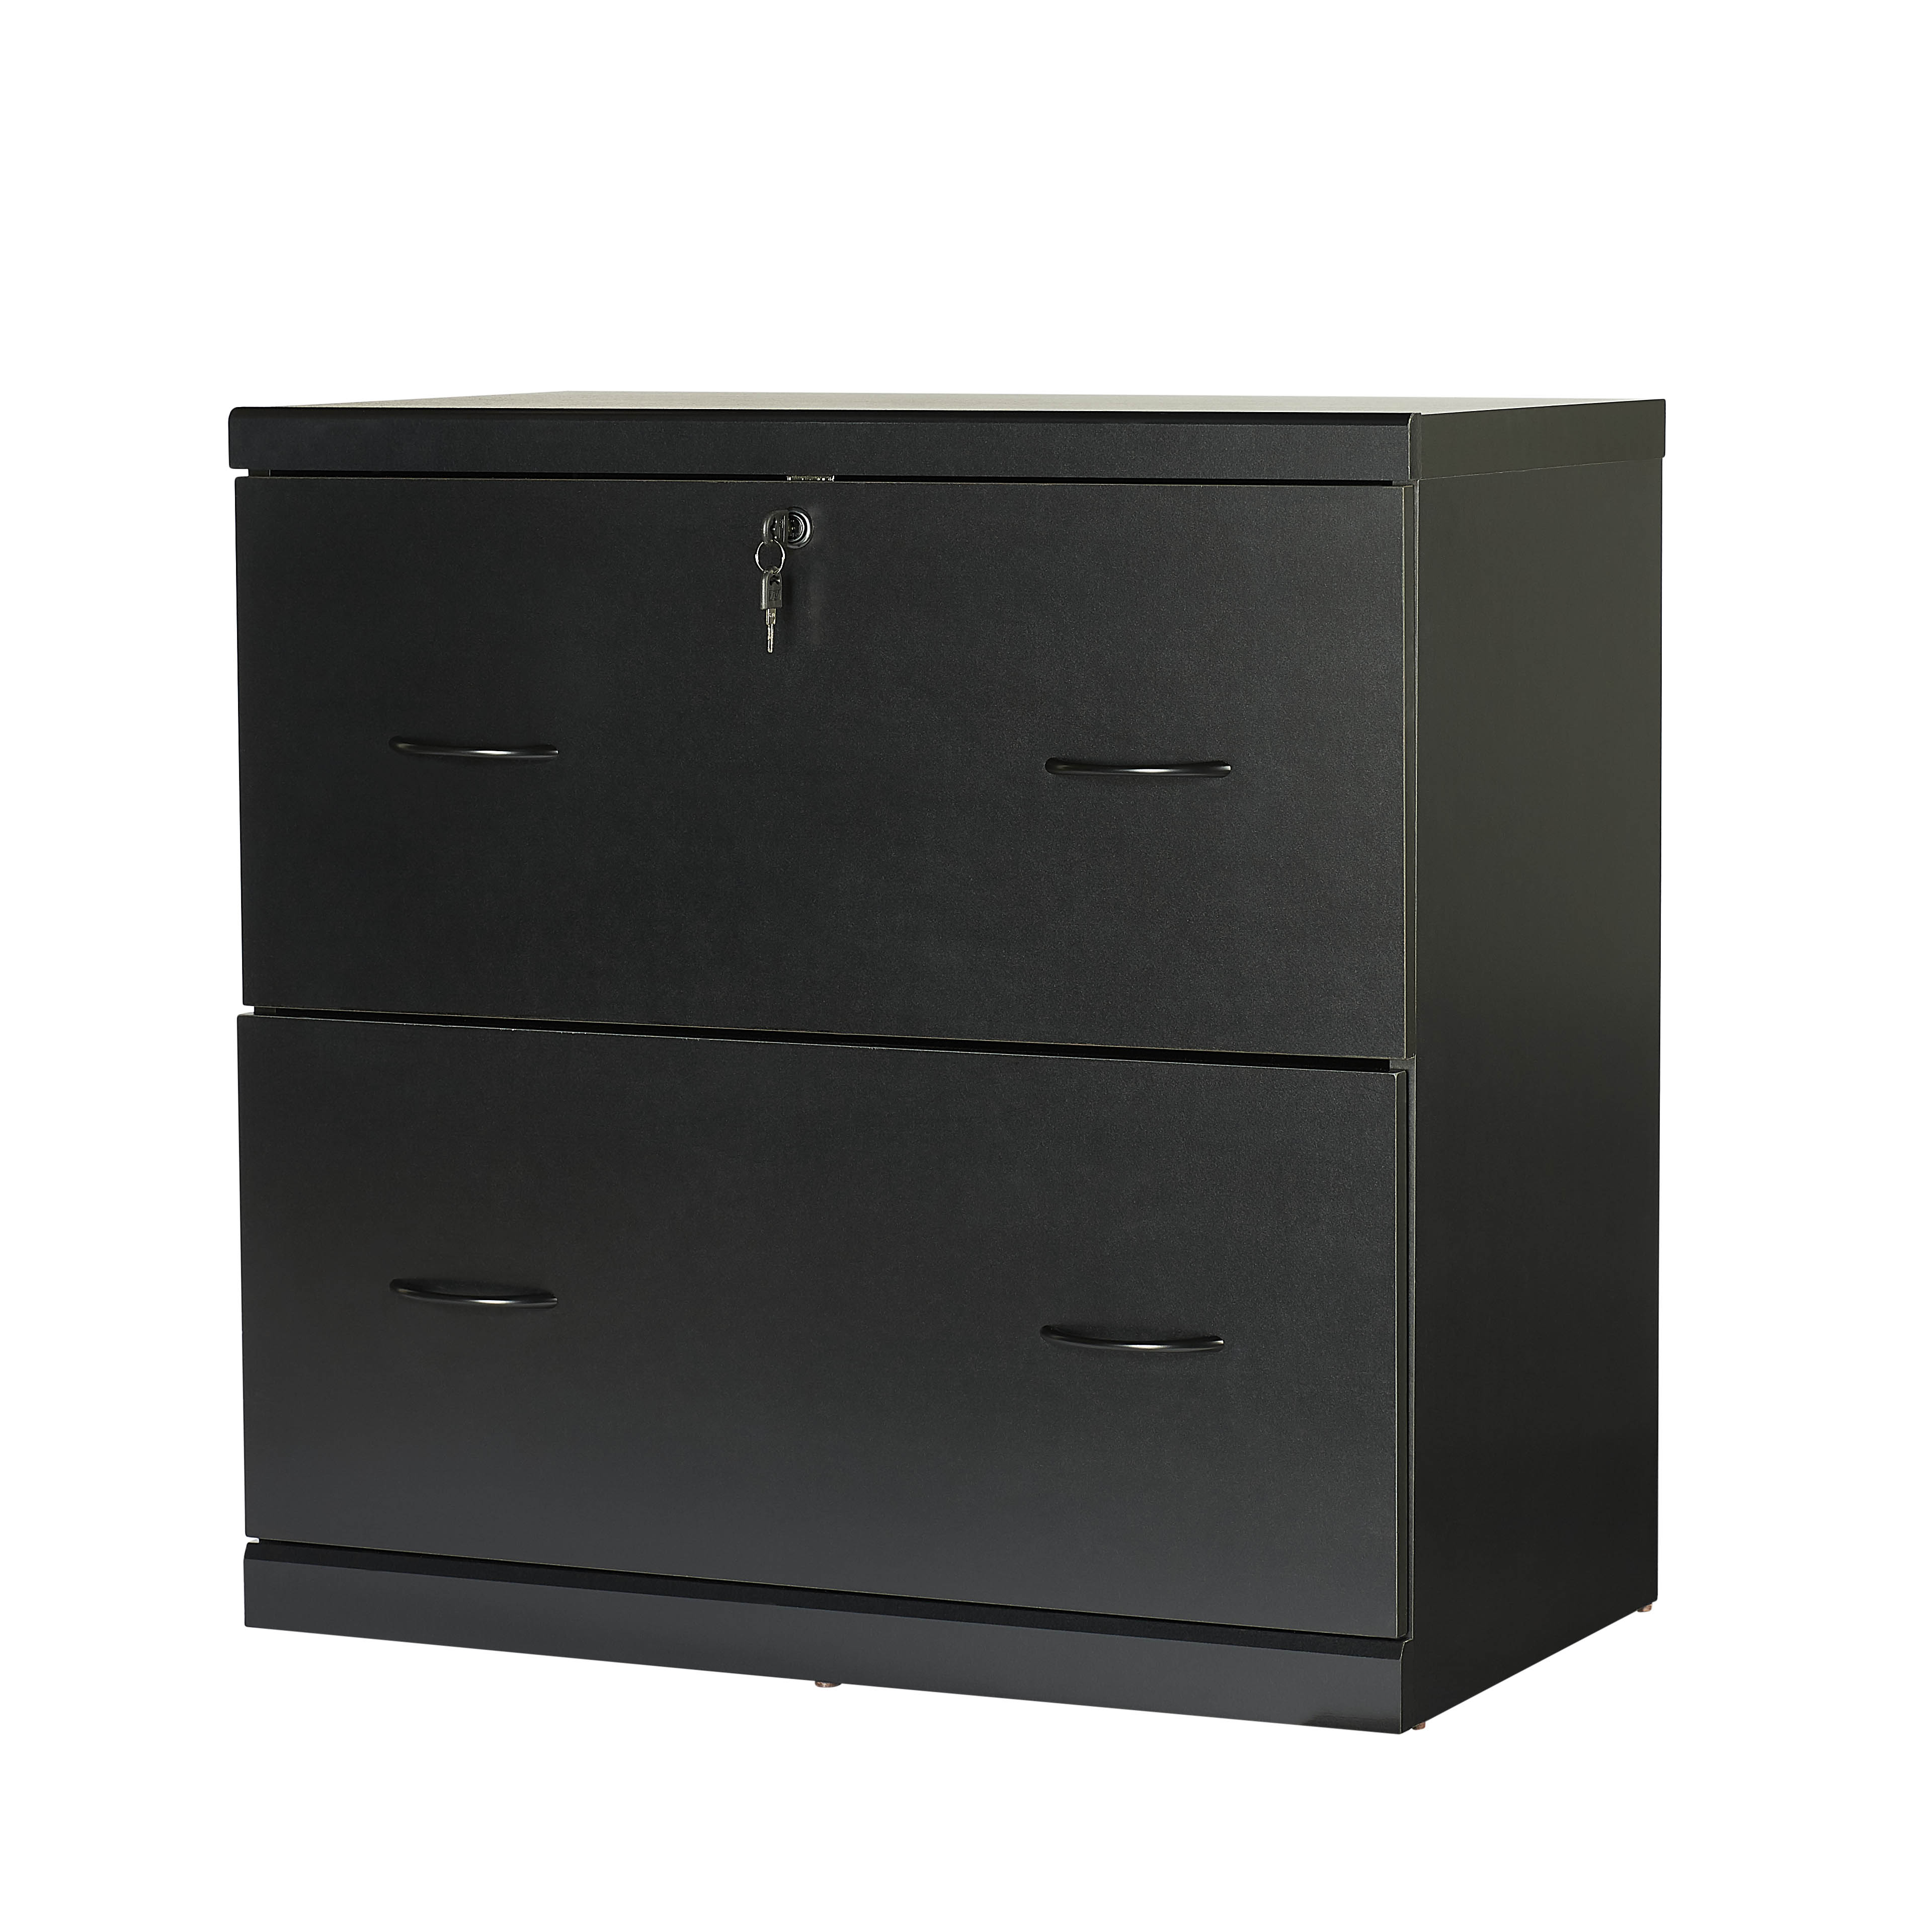 Mainstays 2 Drawer Lateral Locking File Cabinet Walmart pertaining to measurements 3840 X 3840